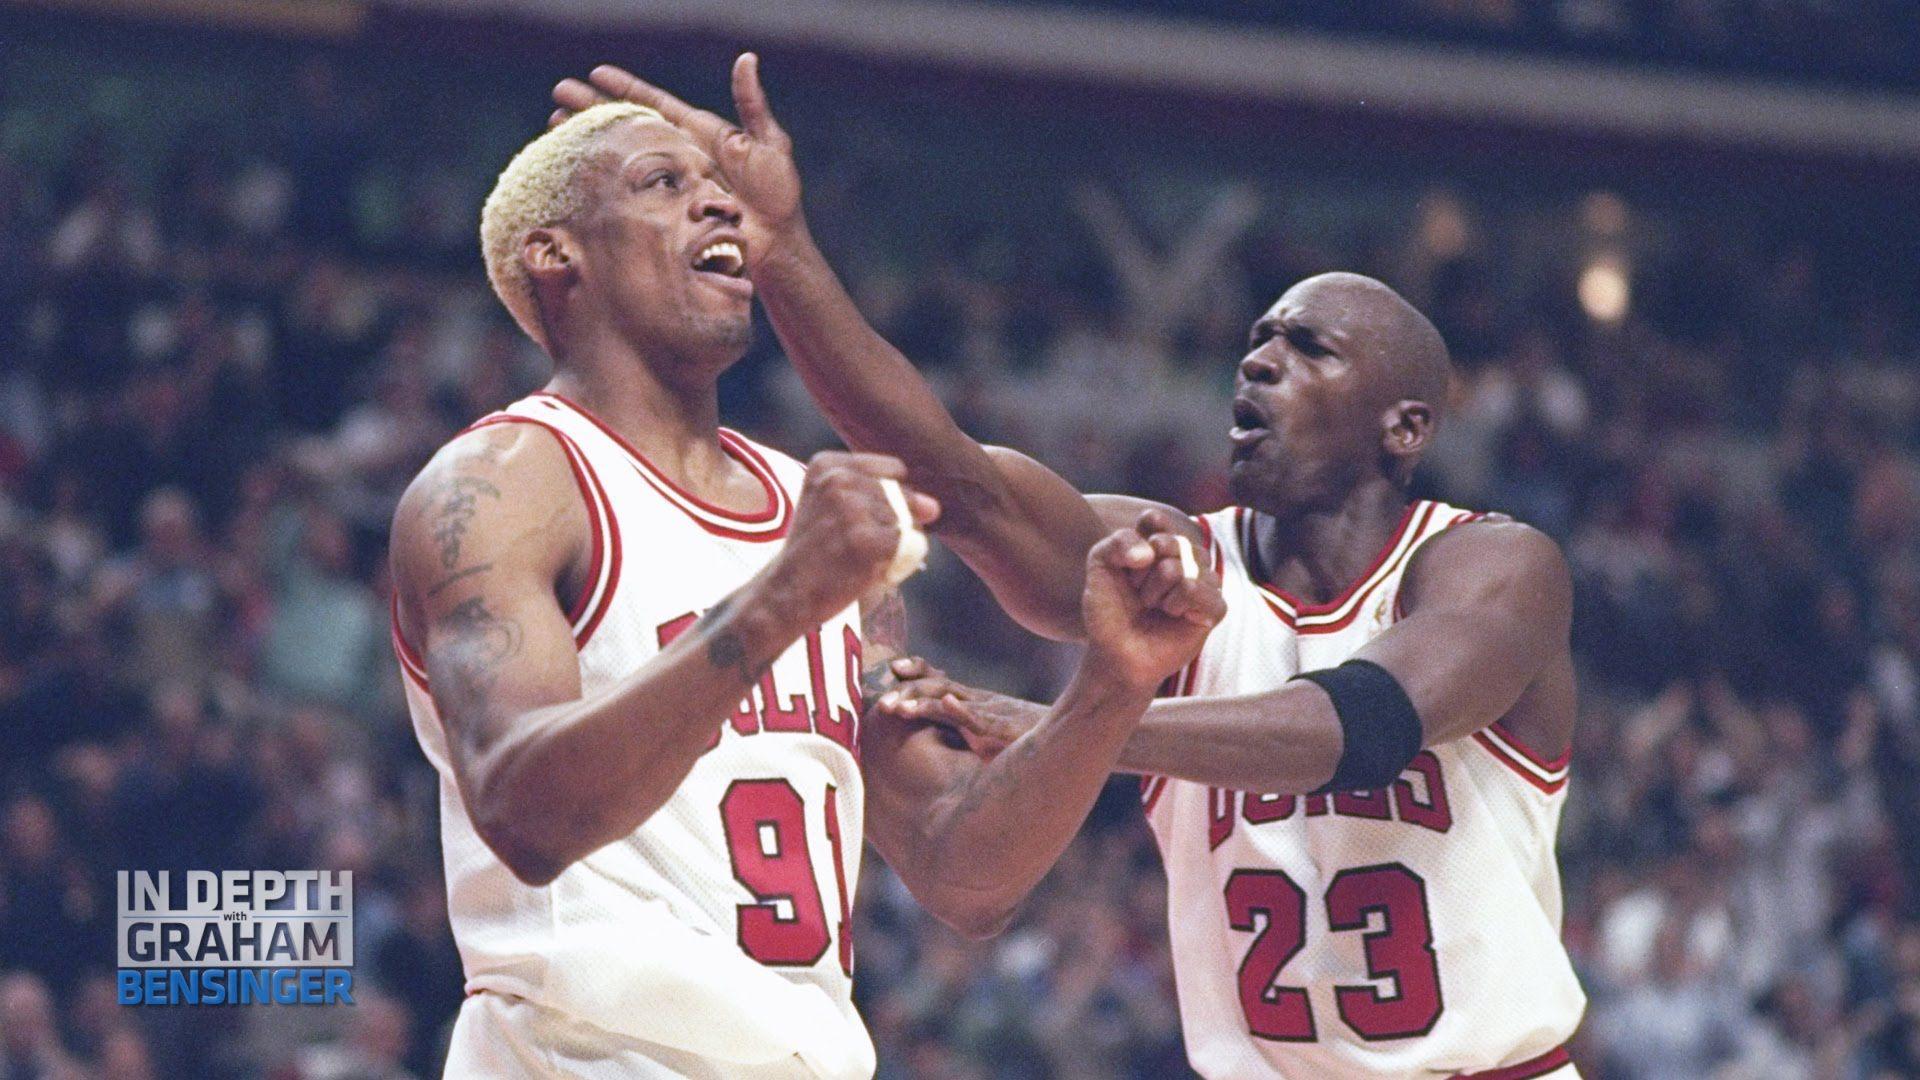 Dennis Rodman interview: Our Chicago Bulls could beat any team